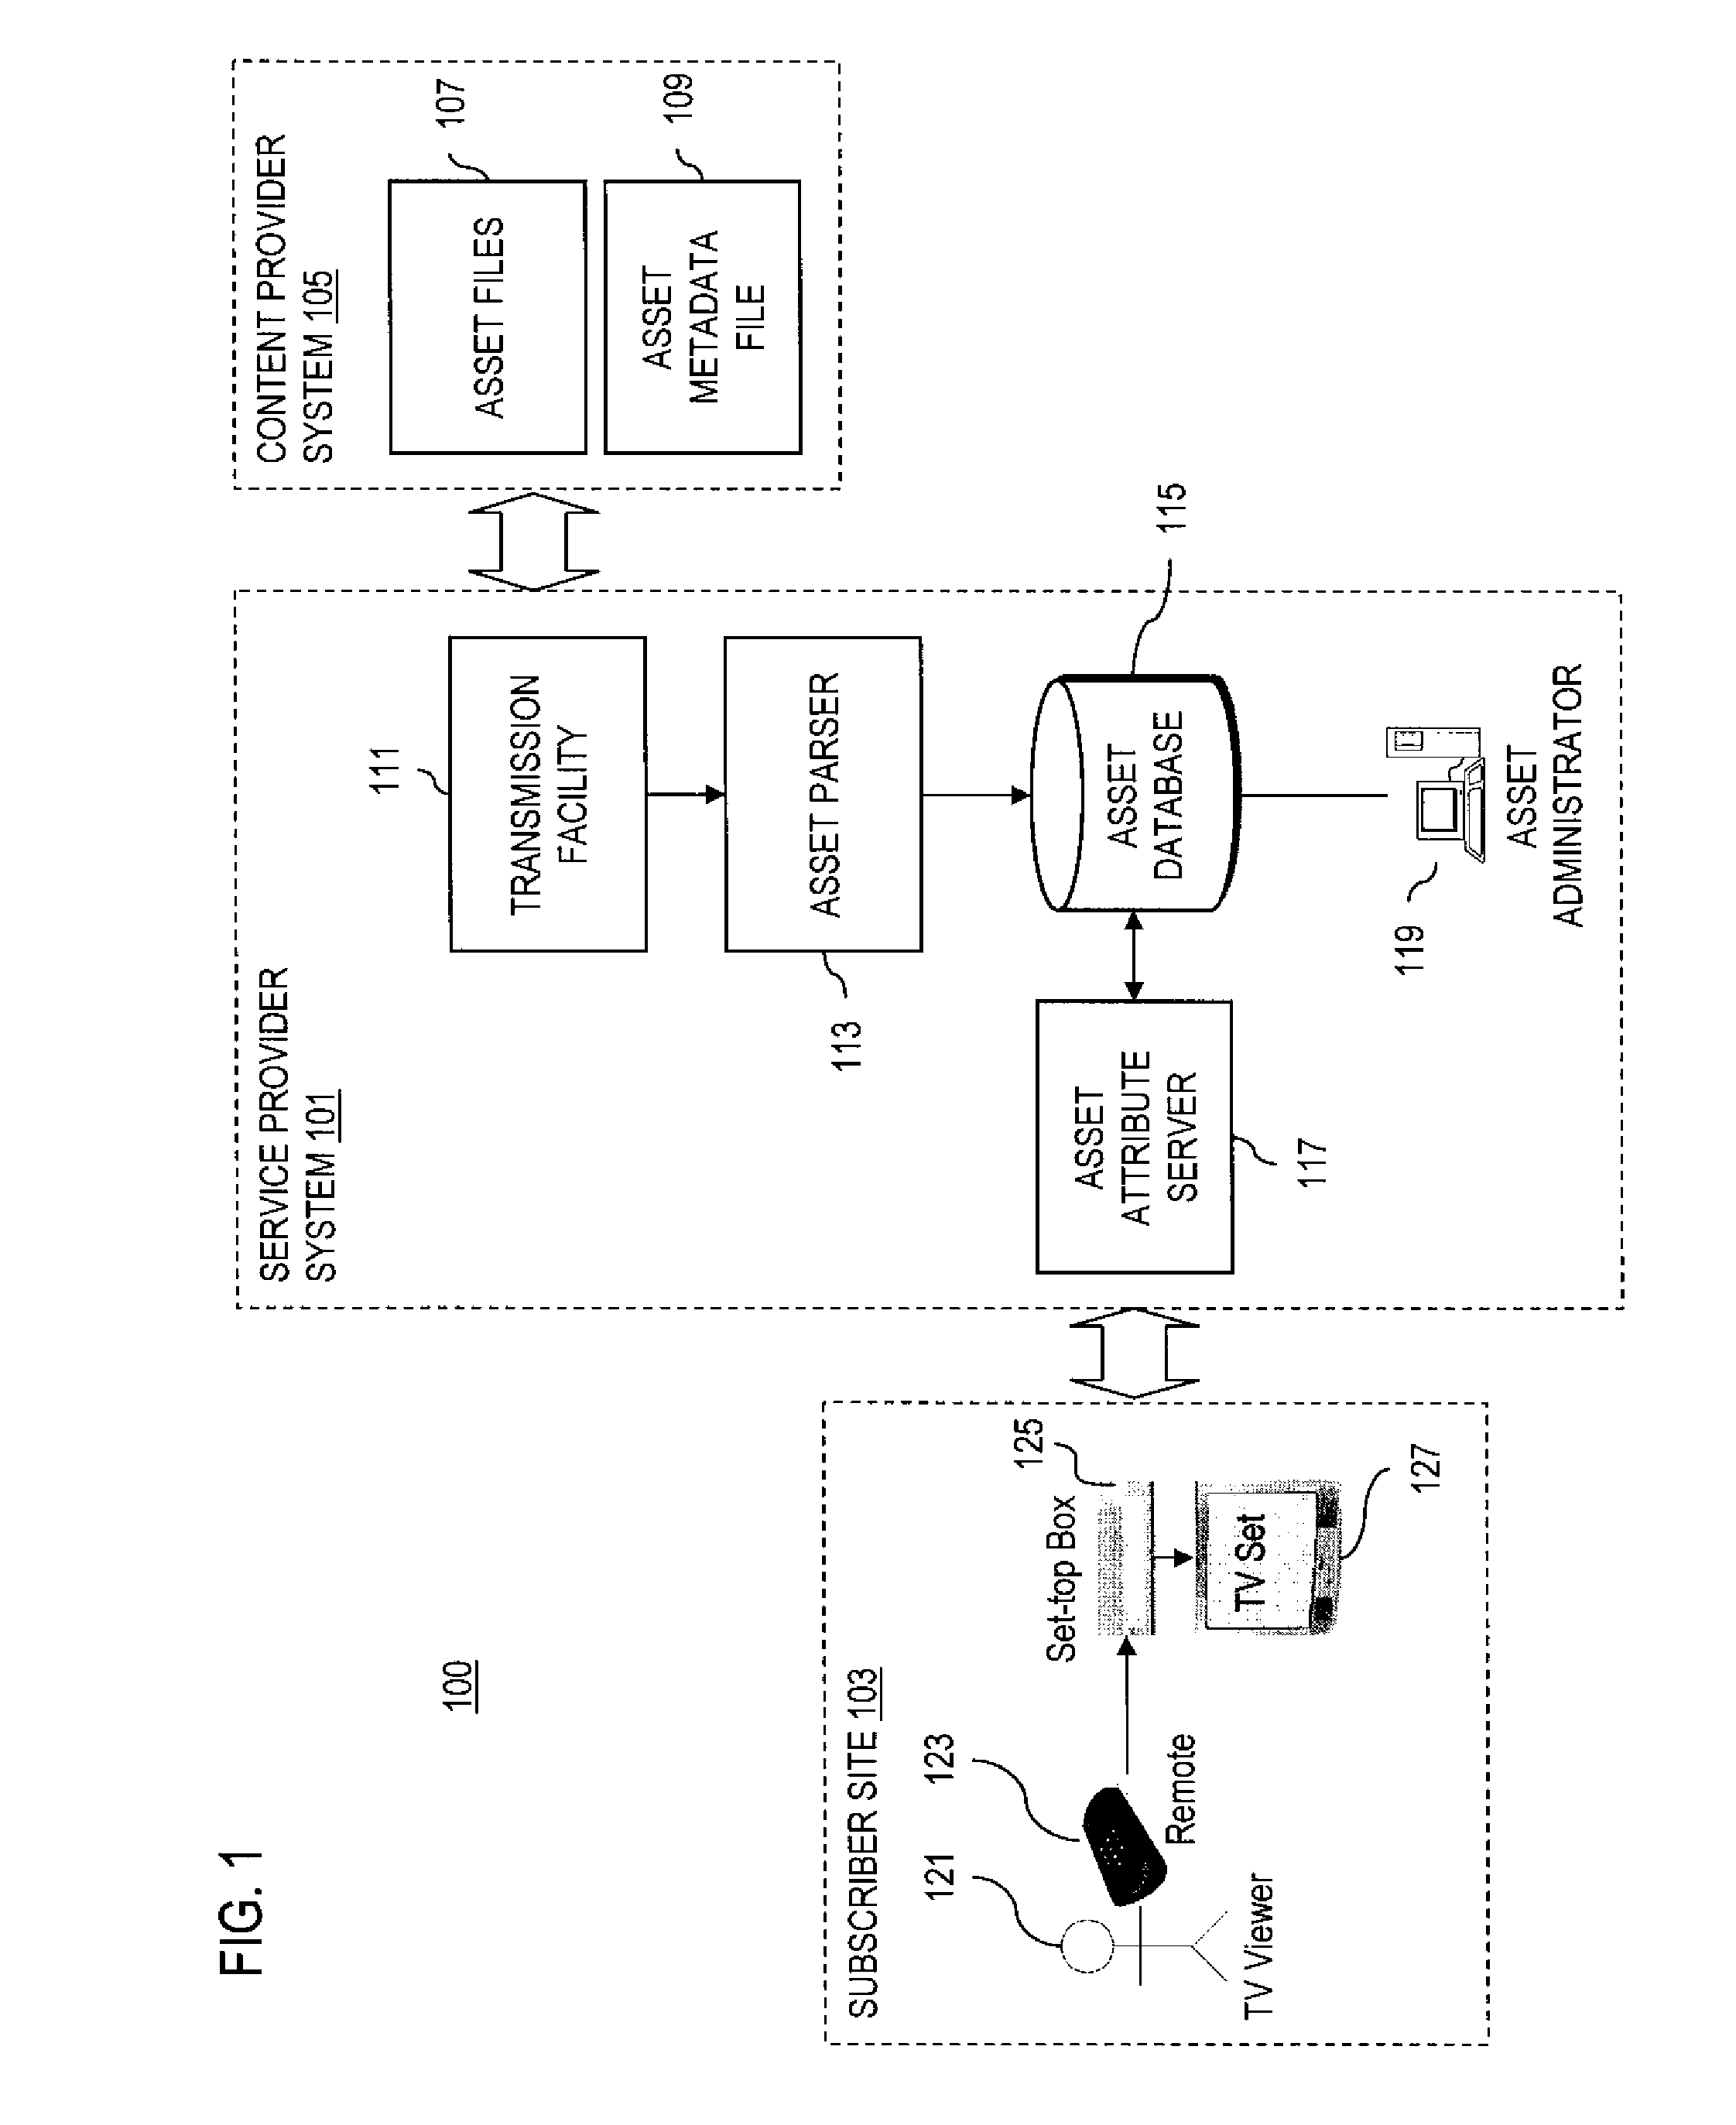 Method and system for providing attribute browsing of video assets